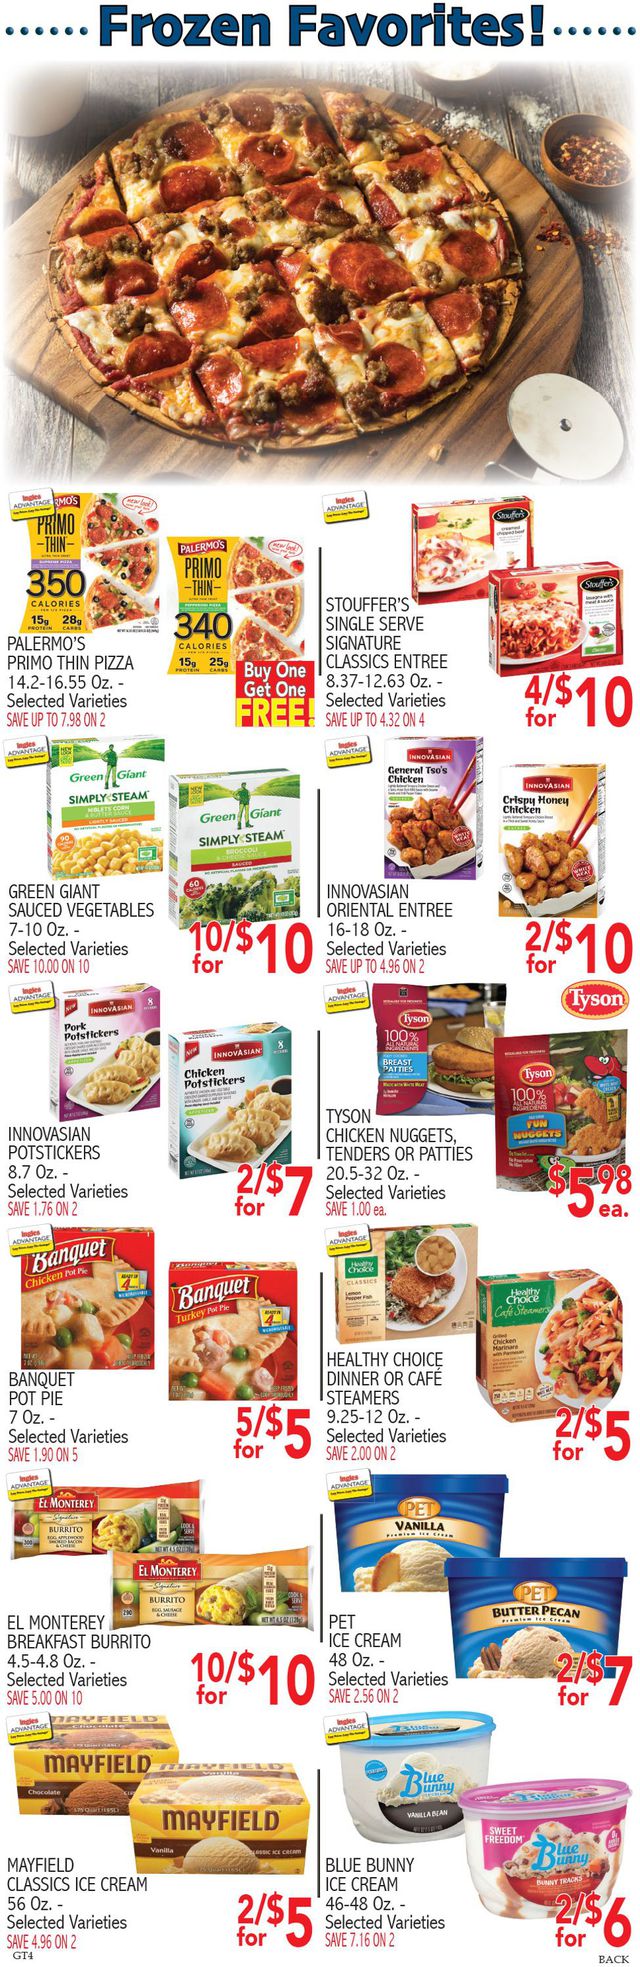 Ingles Ad from 01/26/2022